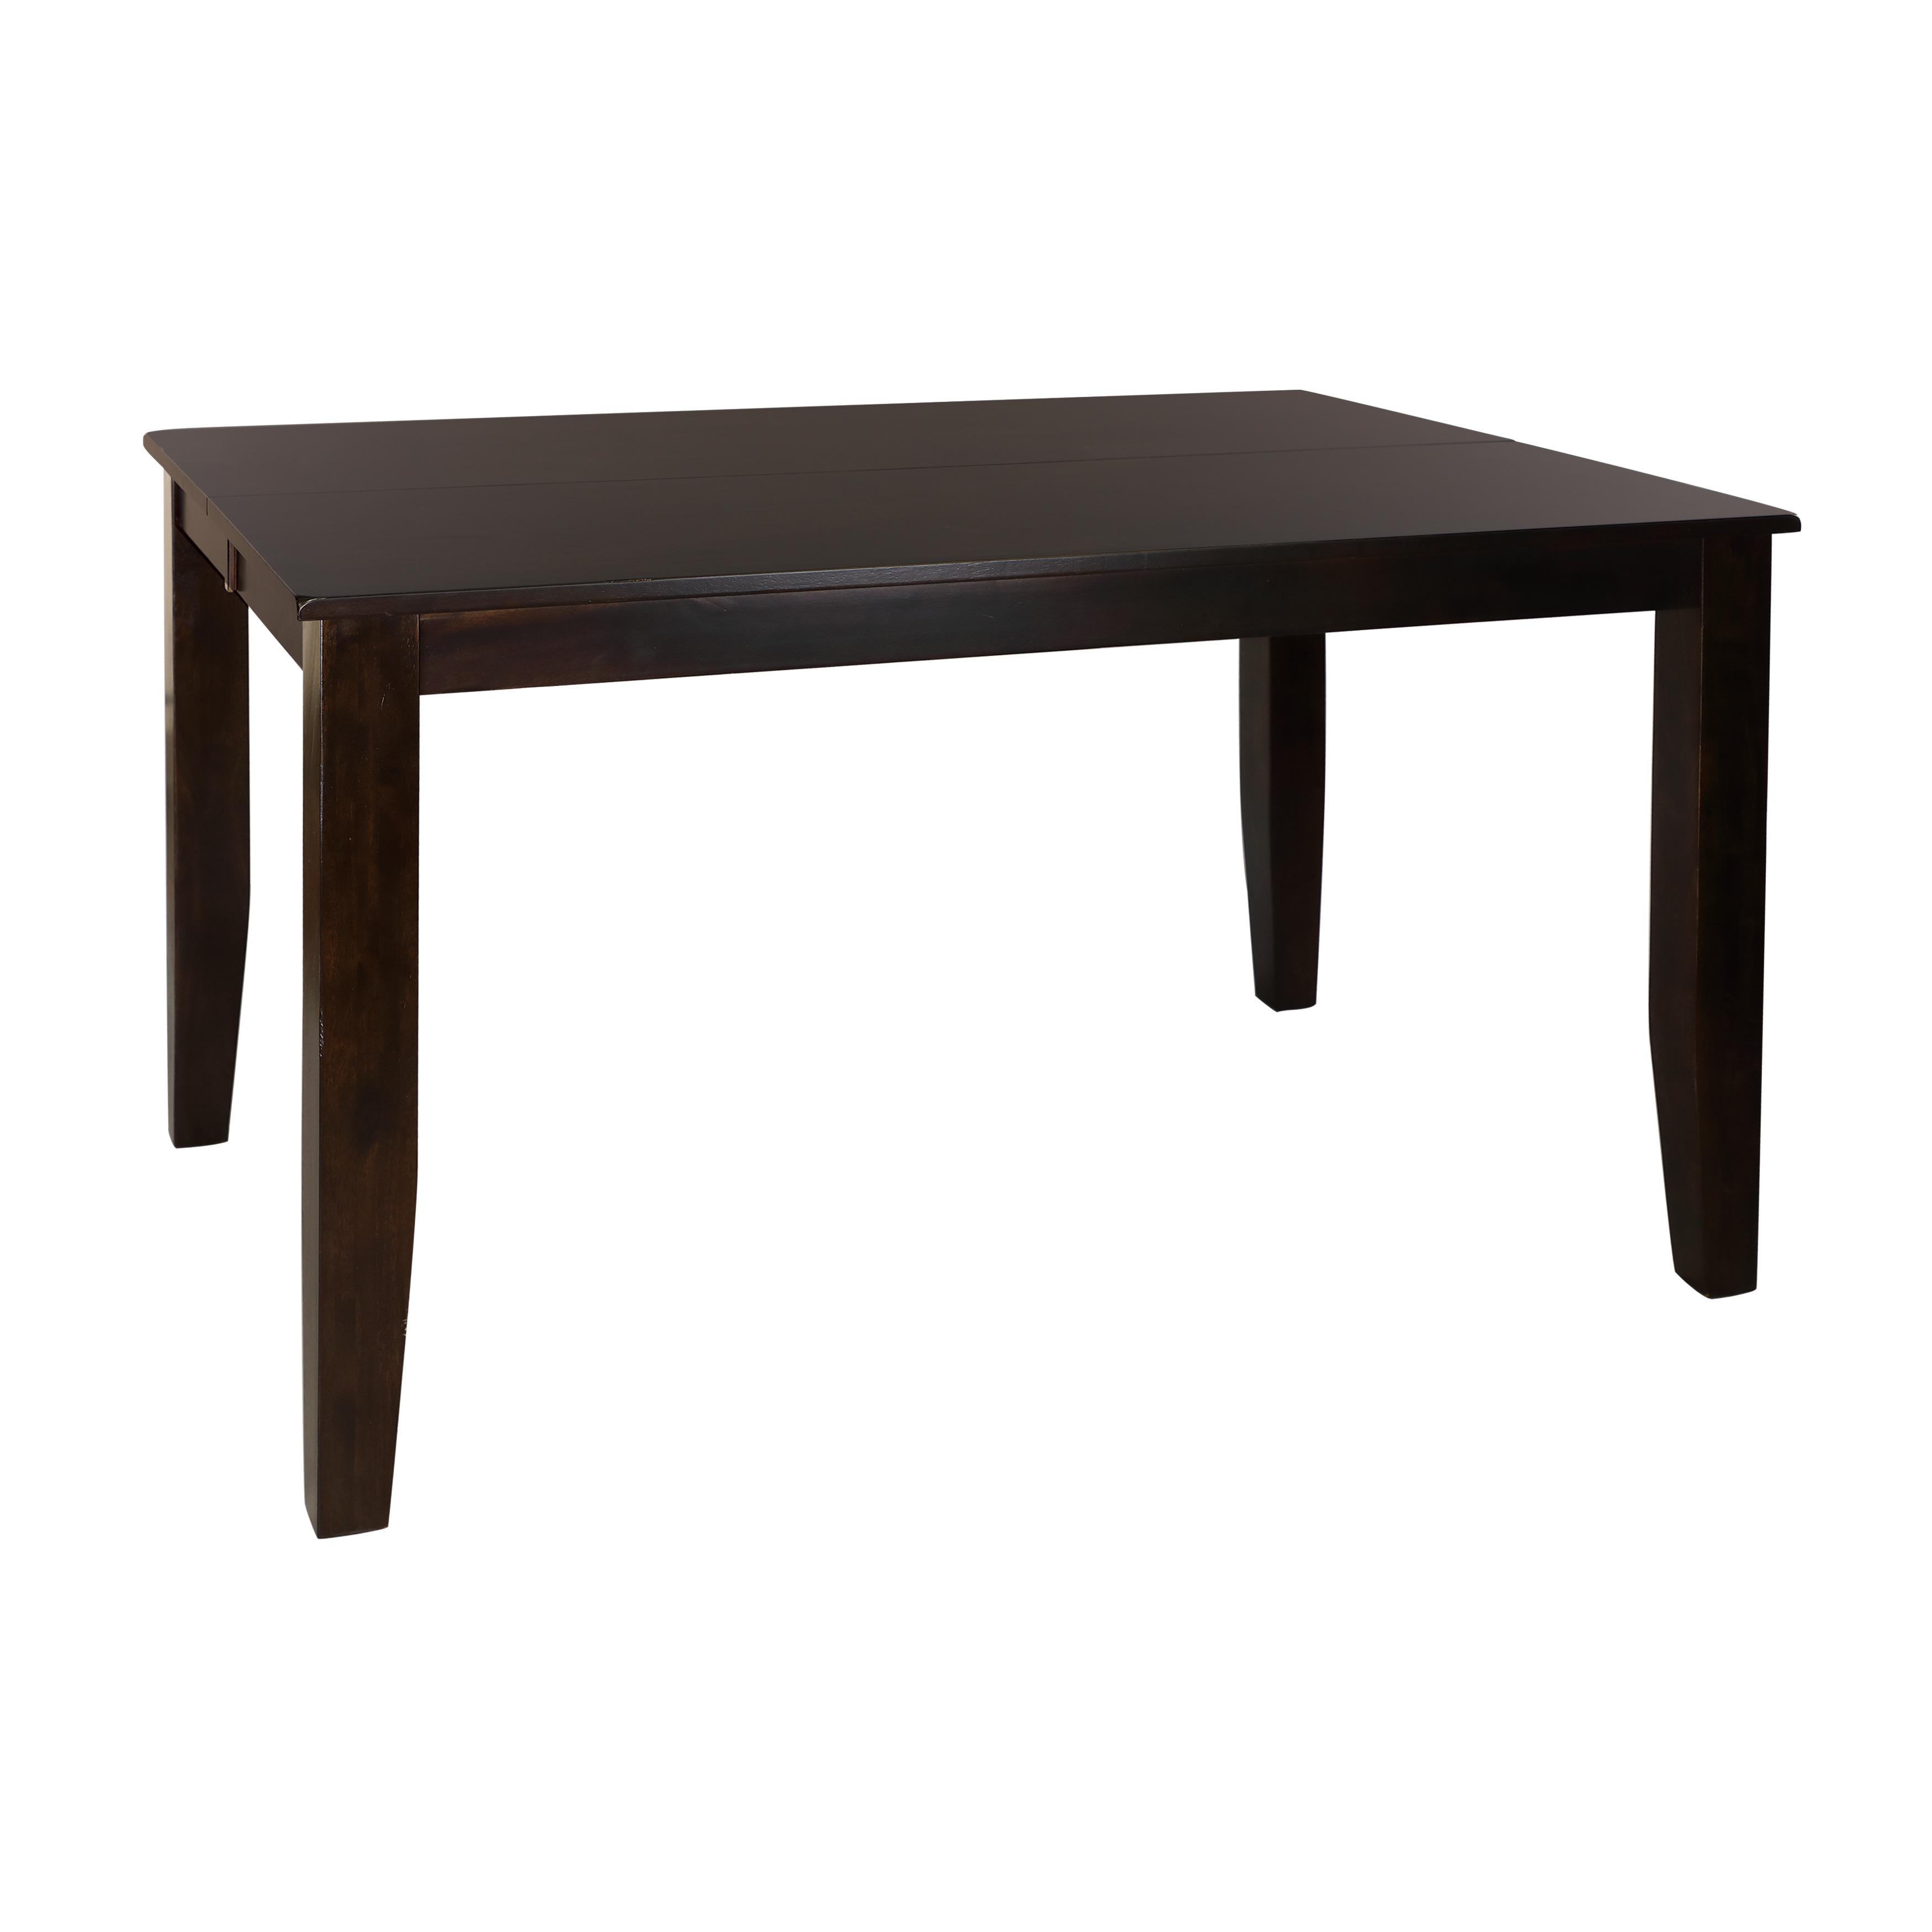 Casual Counter Height Table 1372-36 Crown Point 1372-36 in Merlot 